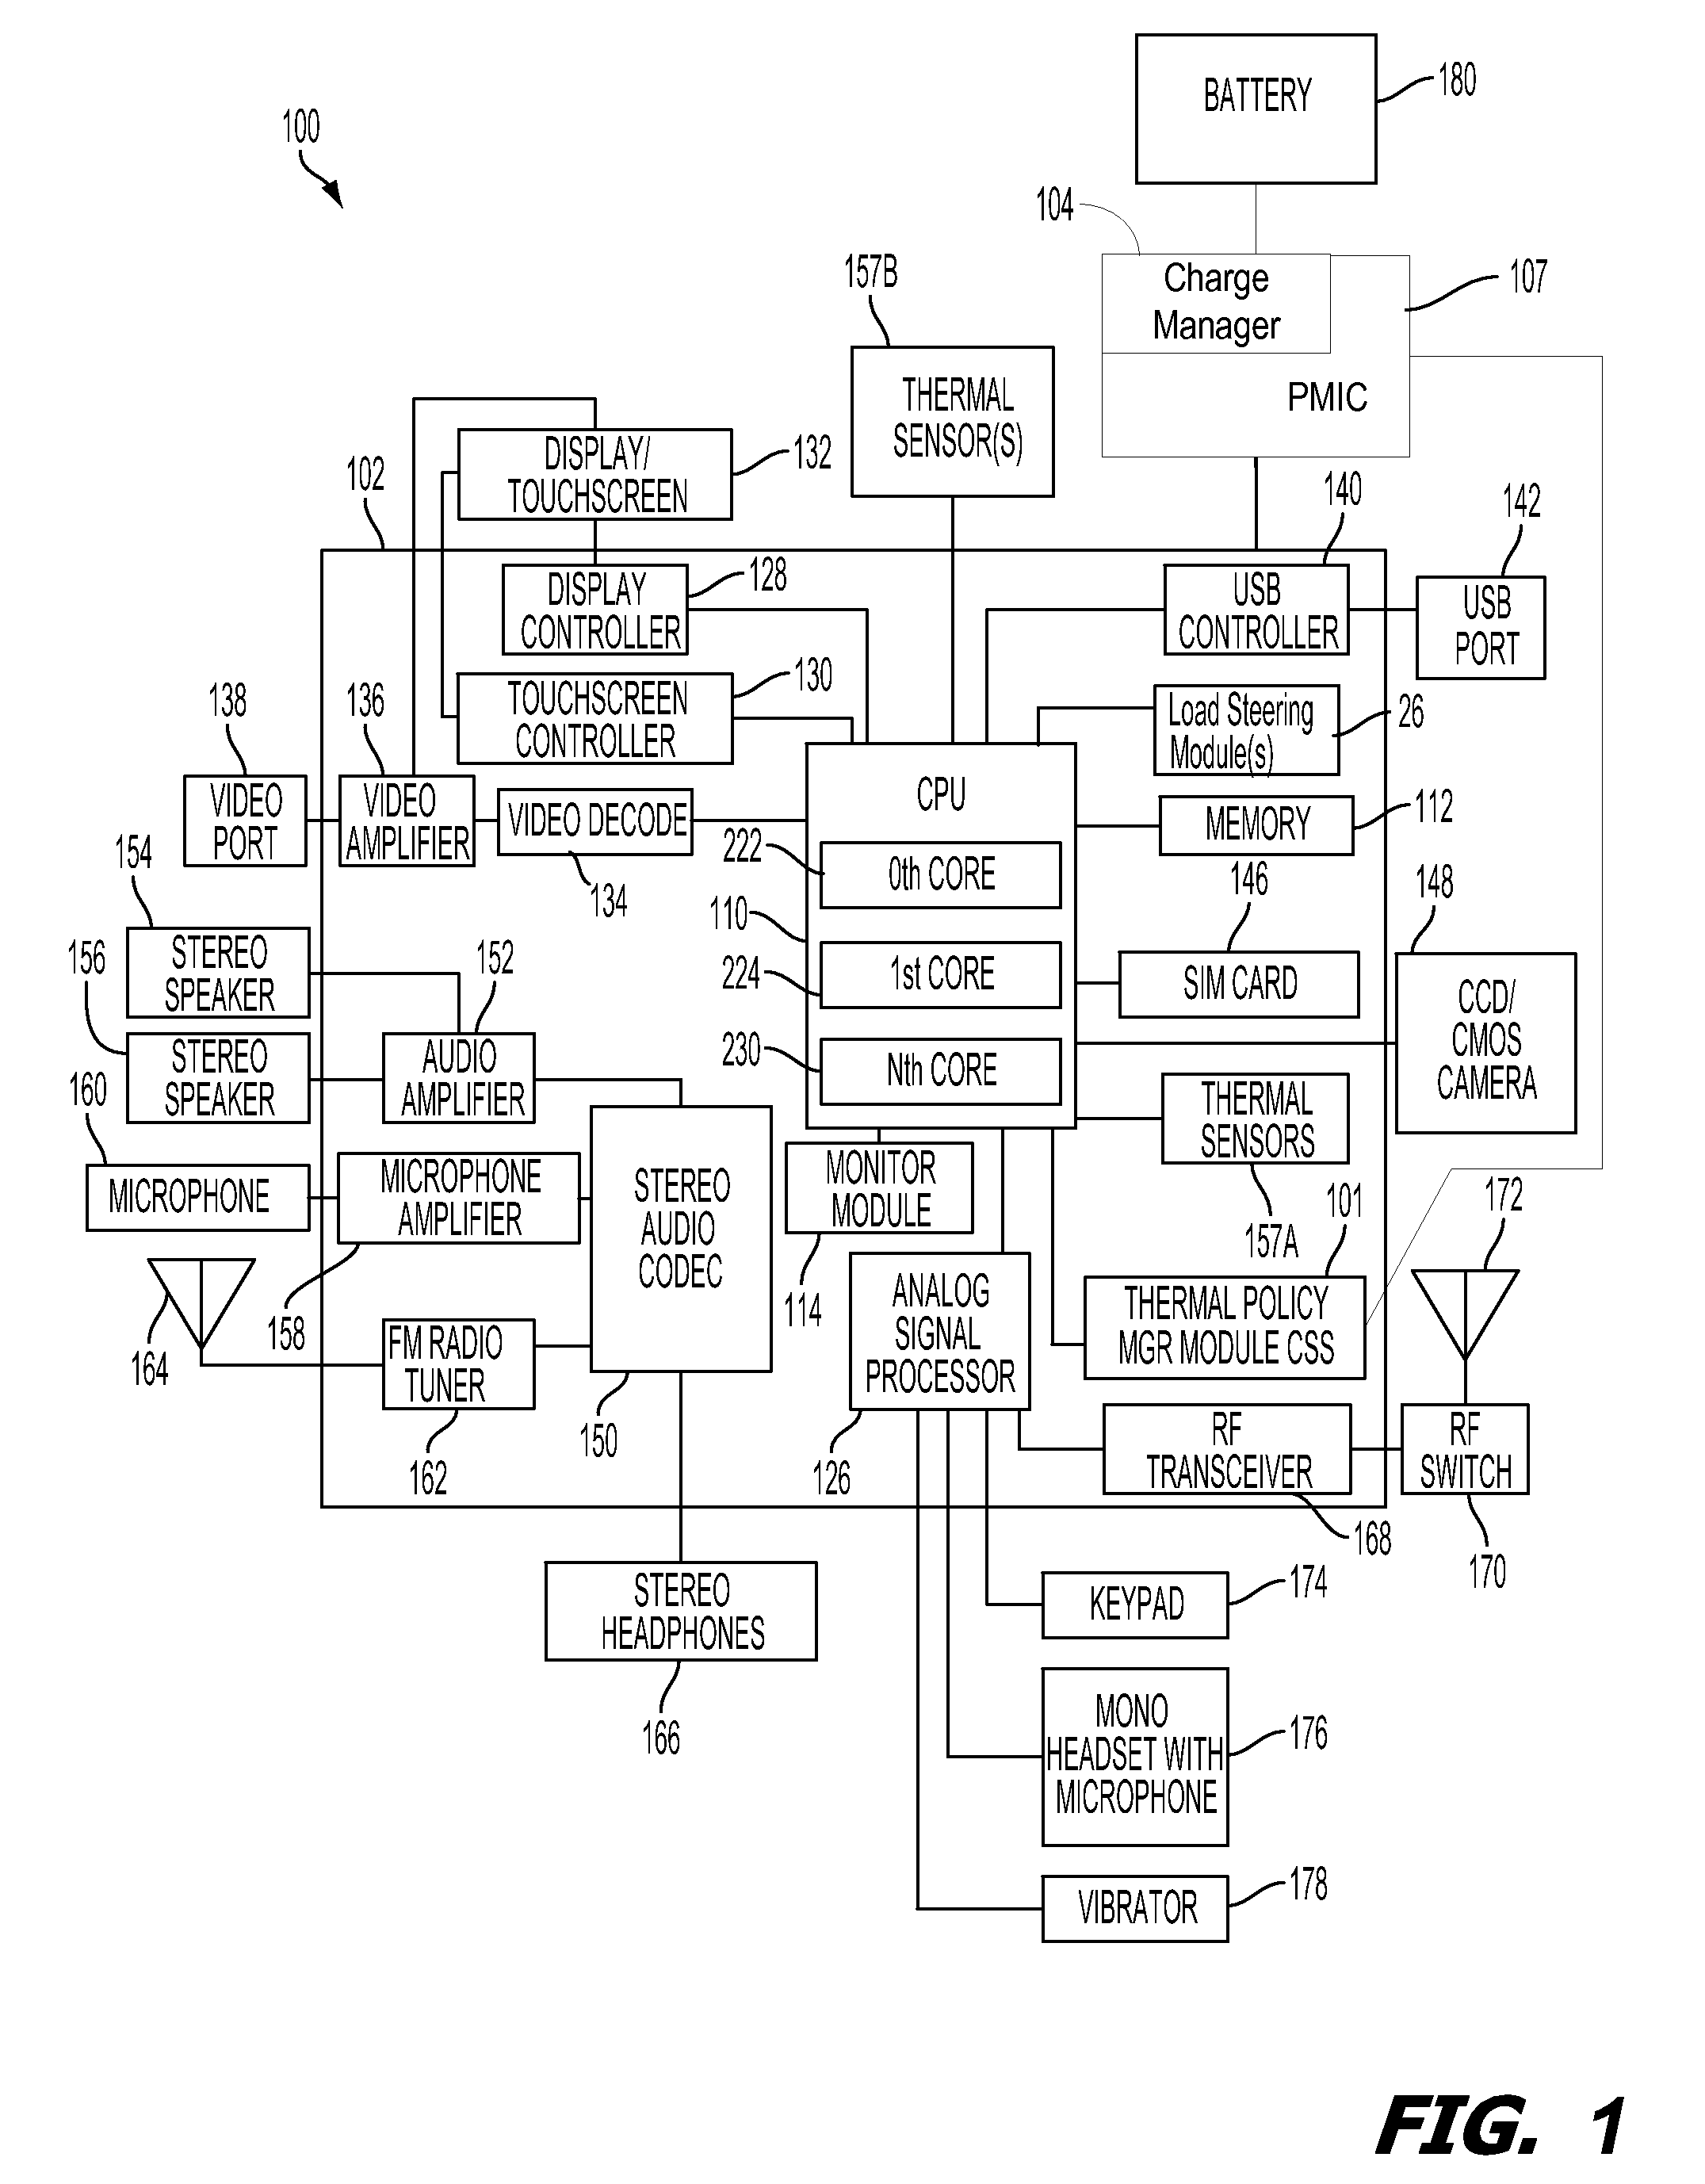 Method and system for thermal management of battery charging concurrencies in a portable computing device